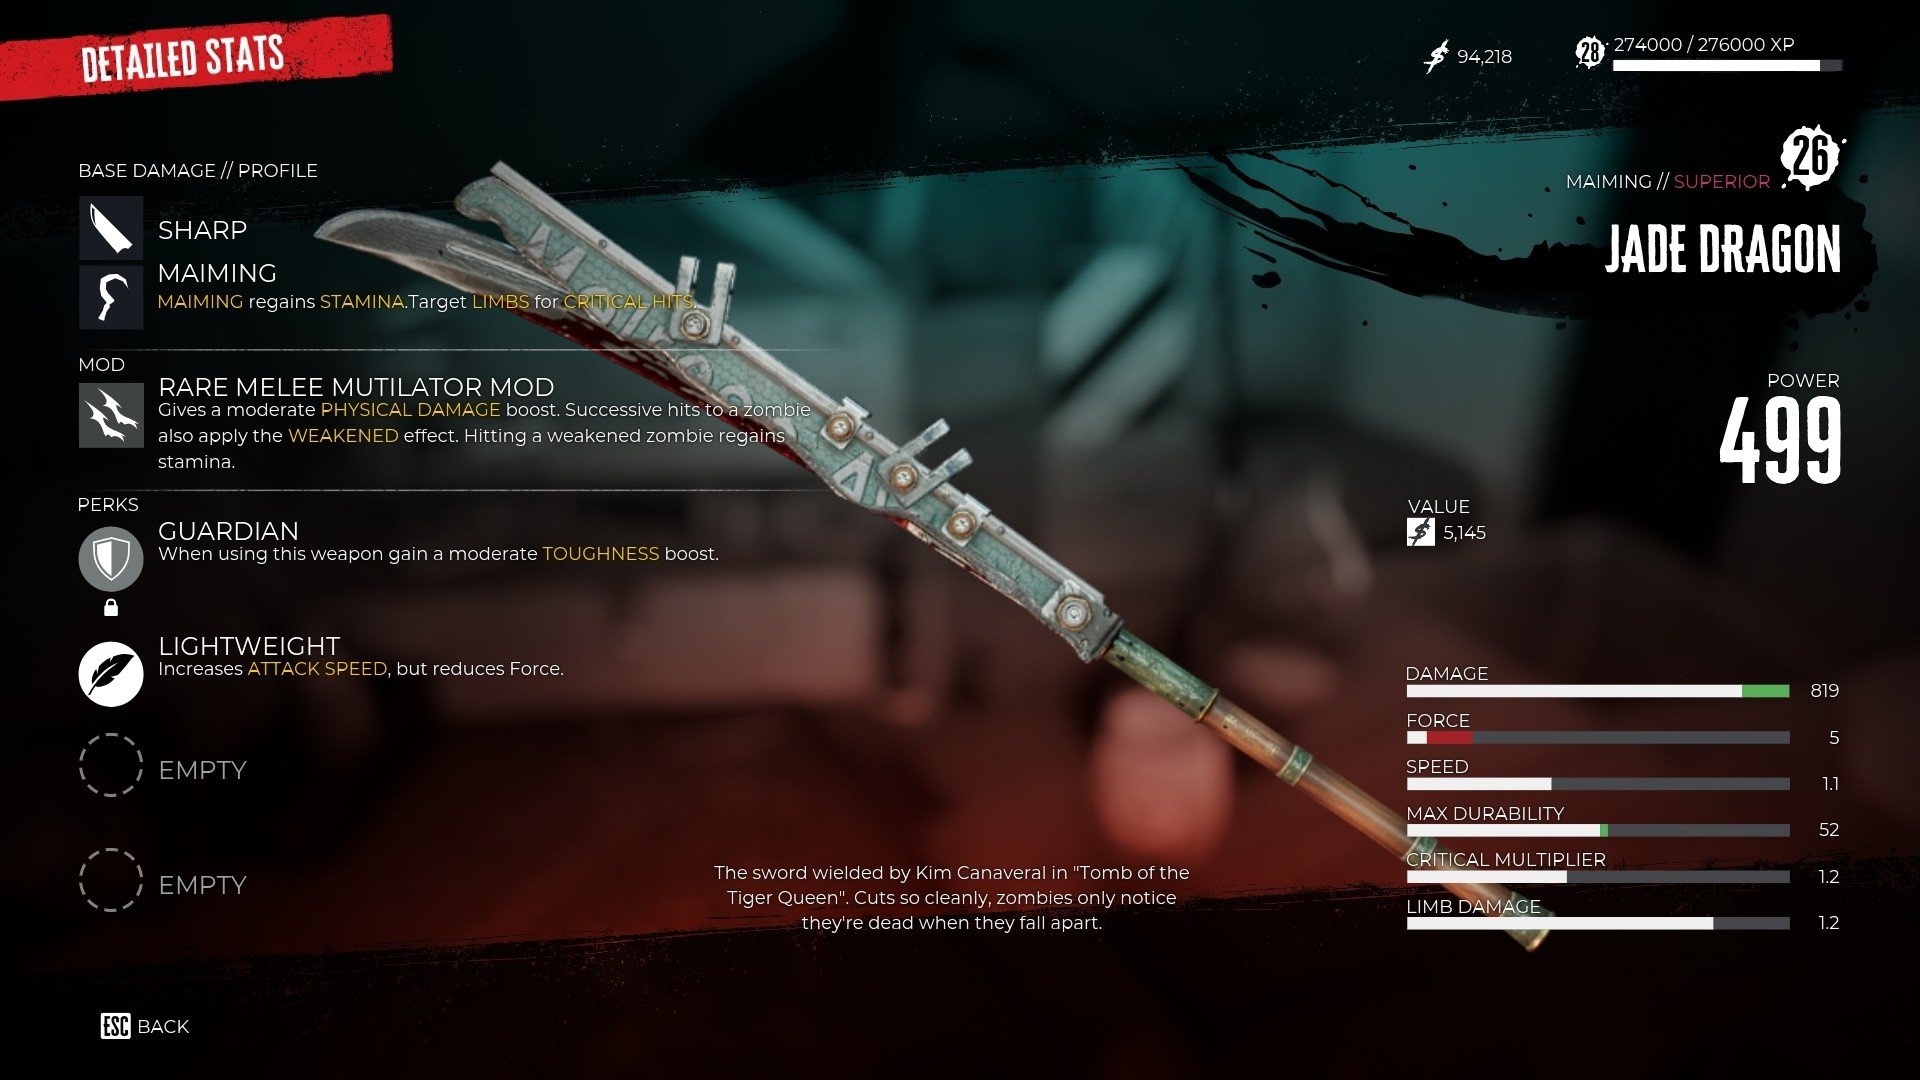 Dead Island 2 menu showing a long-handled blade in the centre surrounded by boxes containing information on the blade's damage and effects